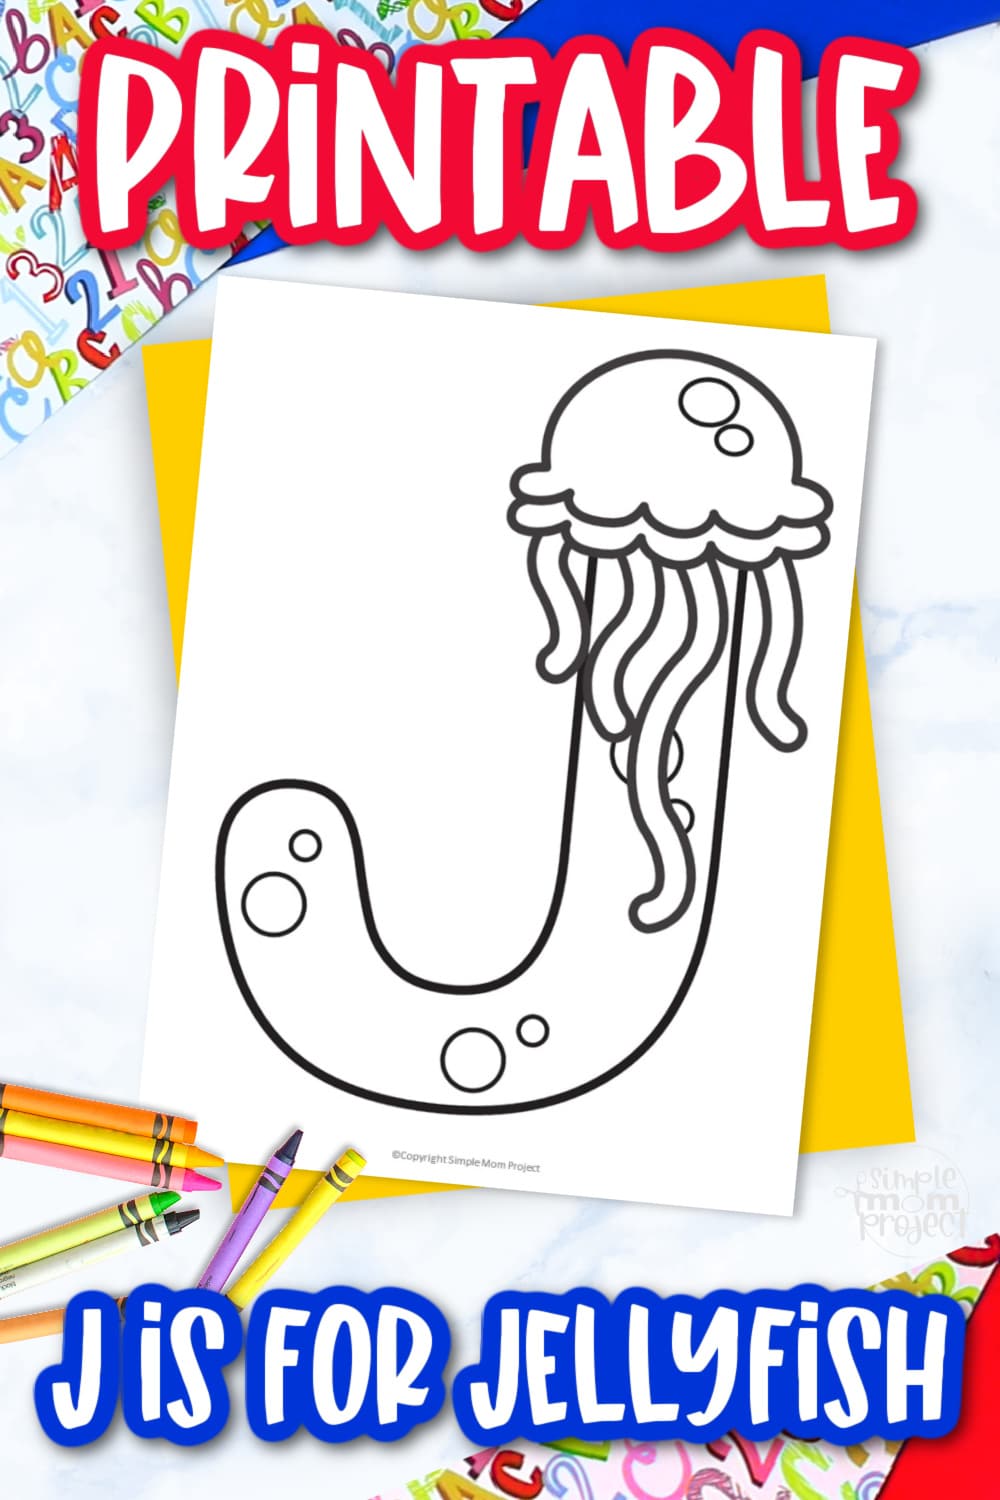 Free printable letter j coloring page â simple mom project